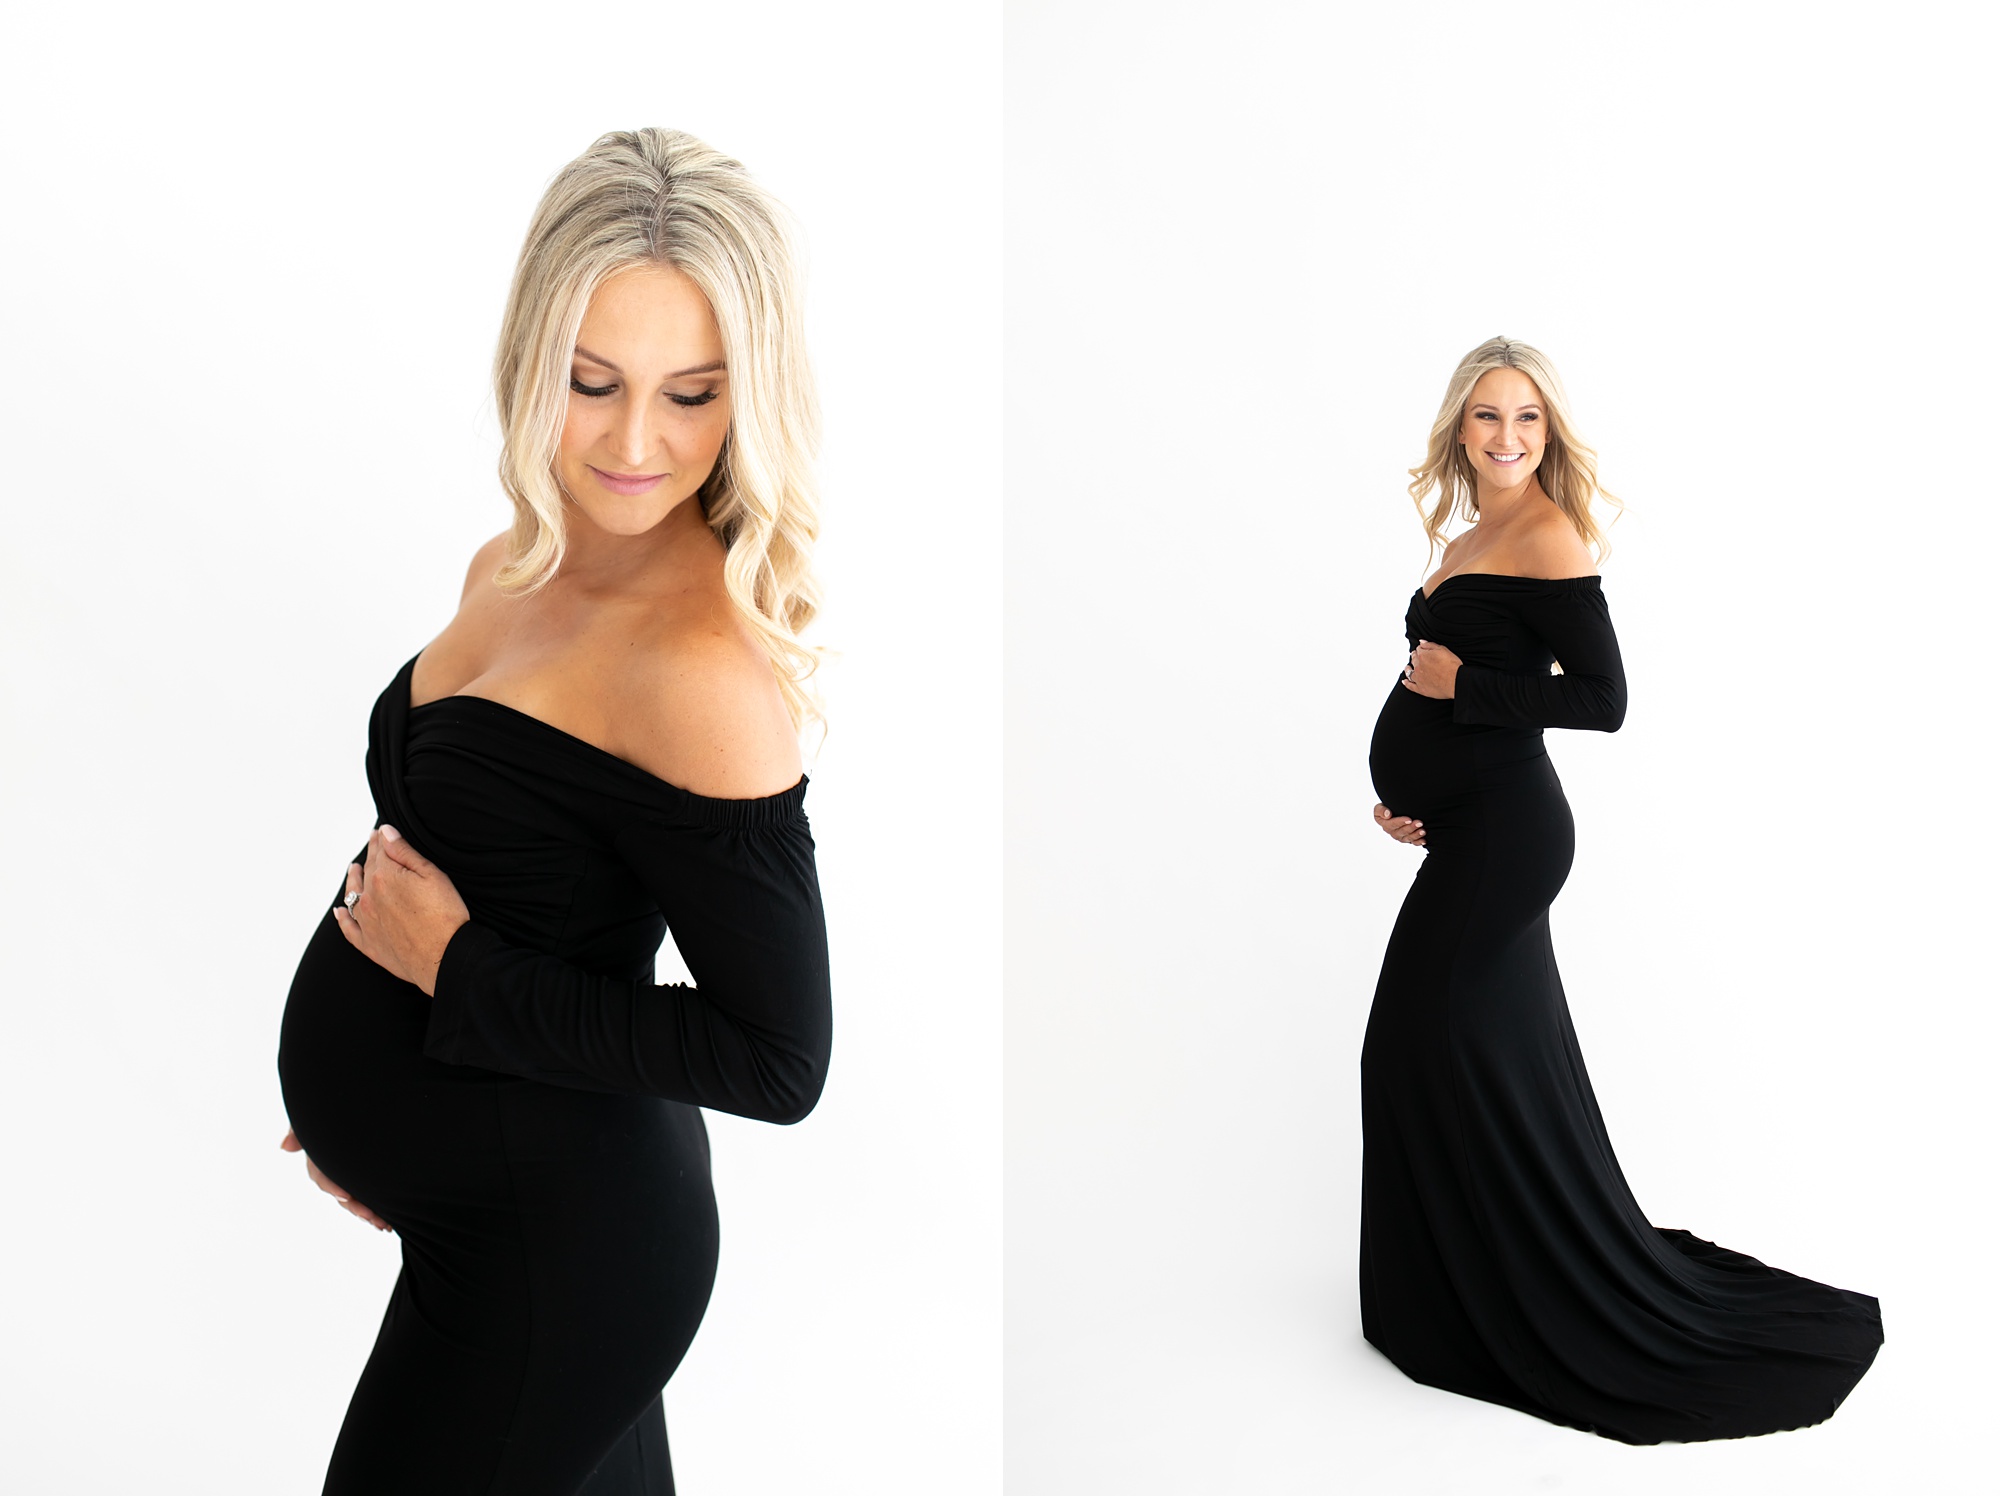 studio maternity session with mom in black gown